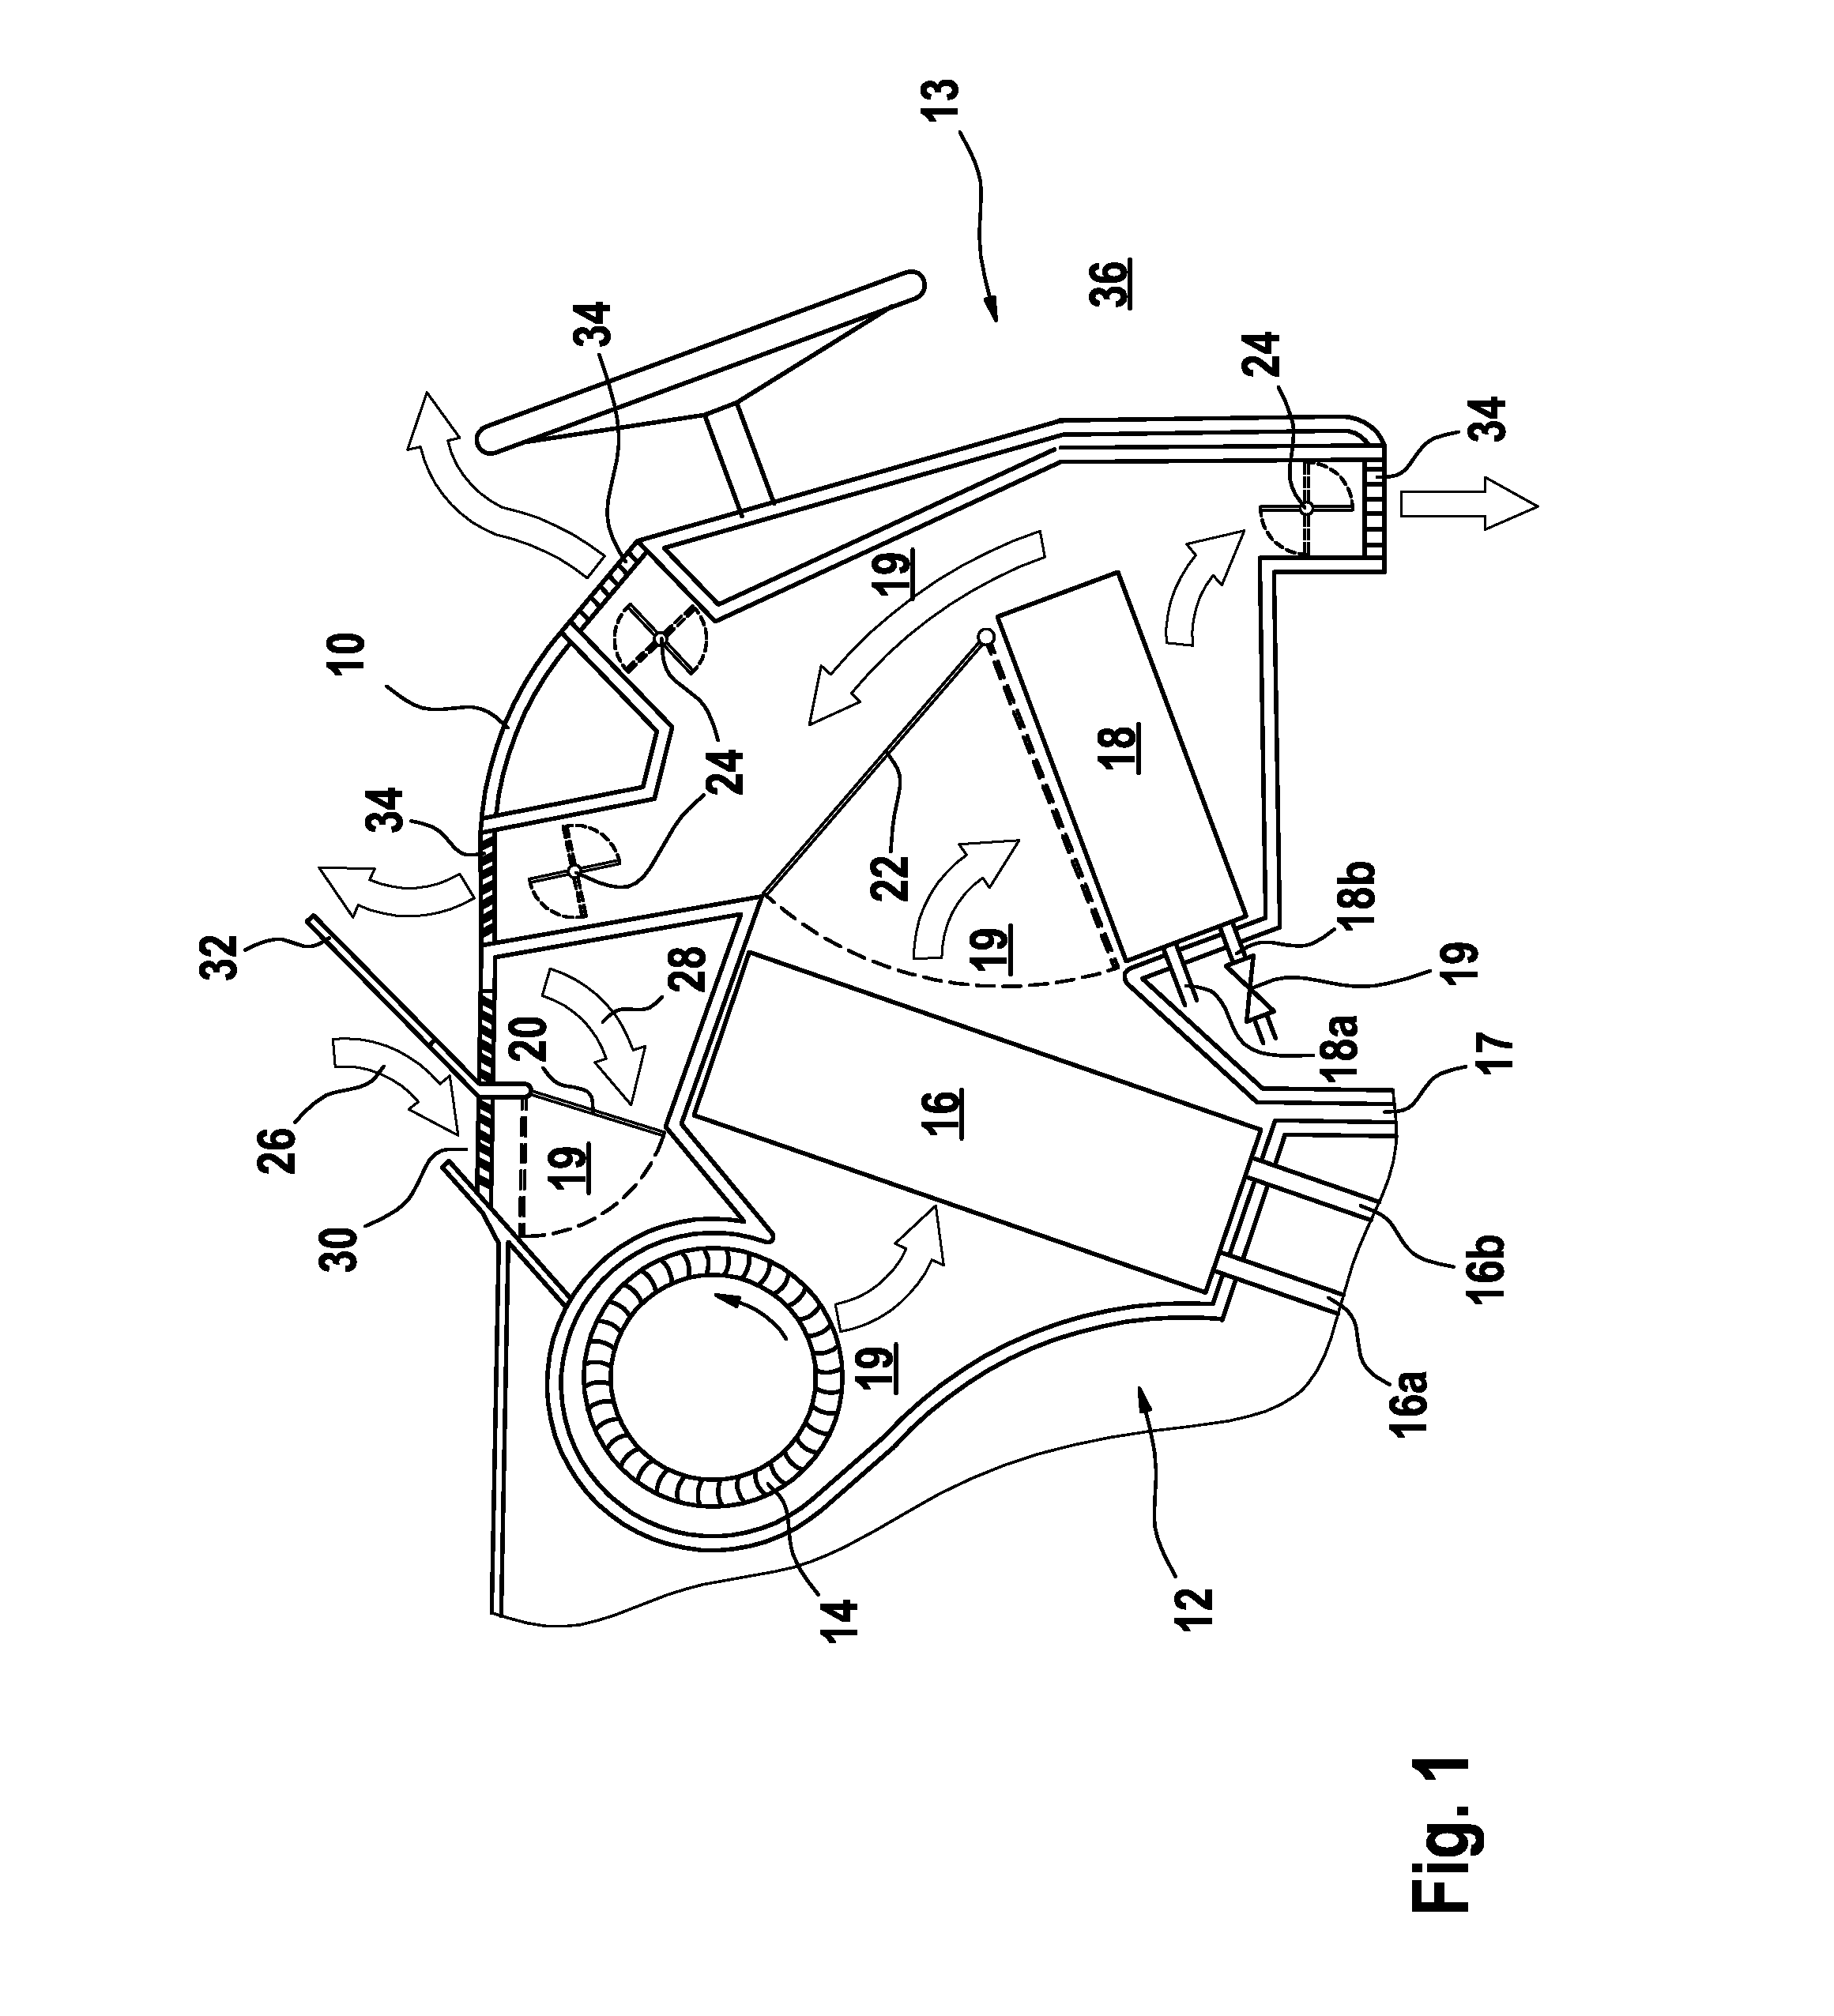 Device for controlling the ventilation apparatus for a motor vehicle interior